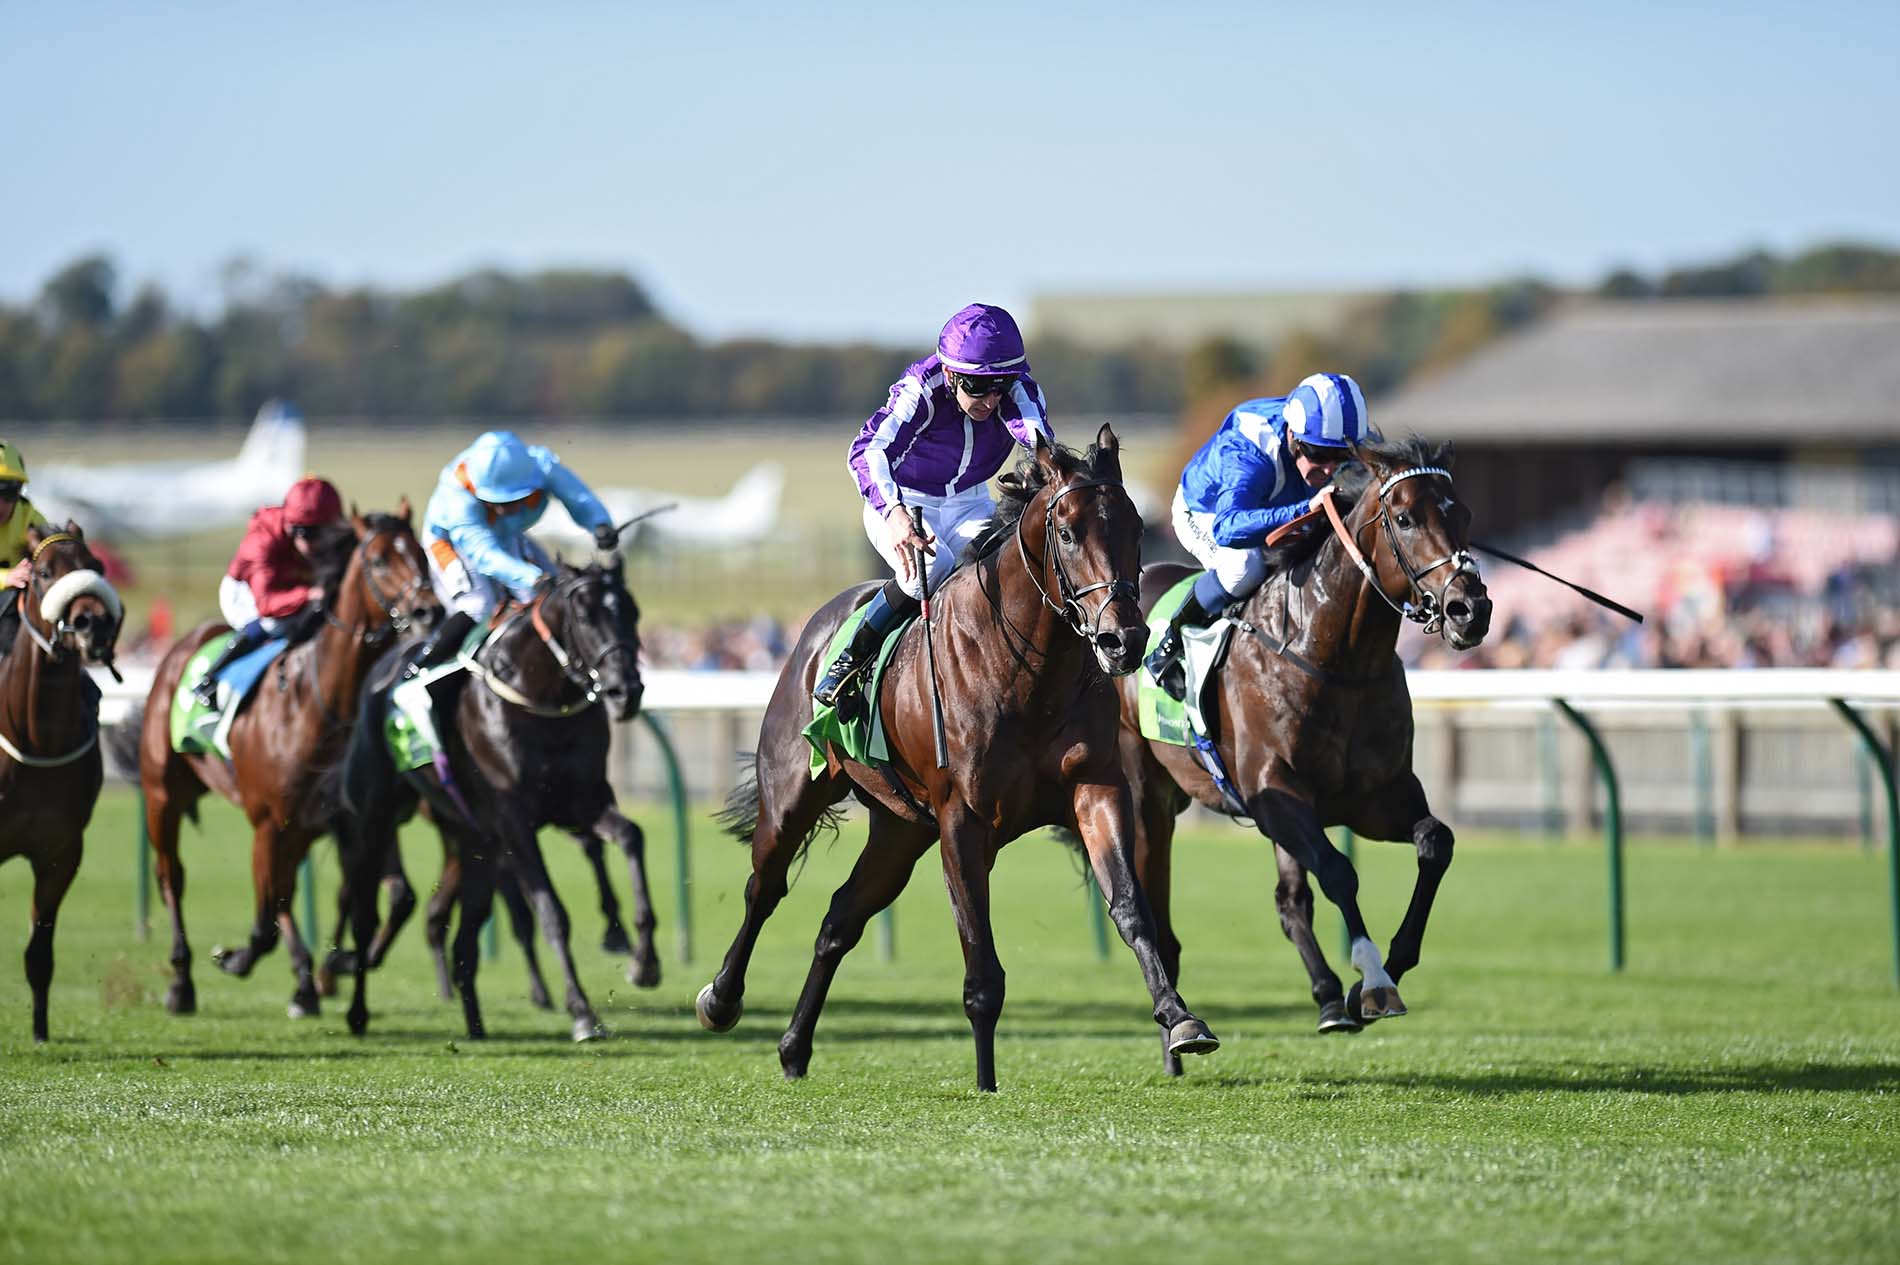 Ten Sovereigns (purple) and Donnacha O'Brien win the Middle Park Stakes at Newmarket